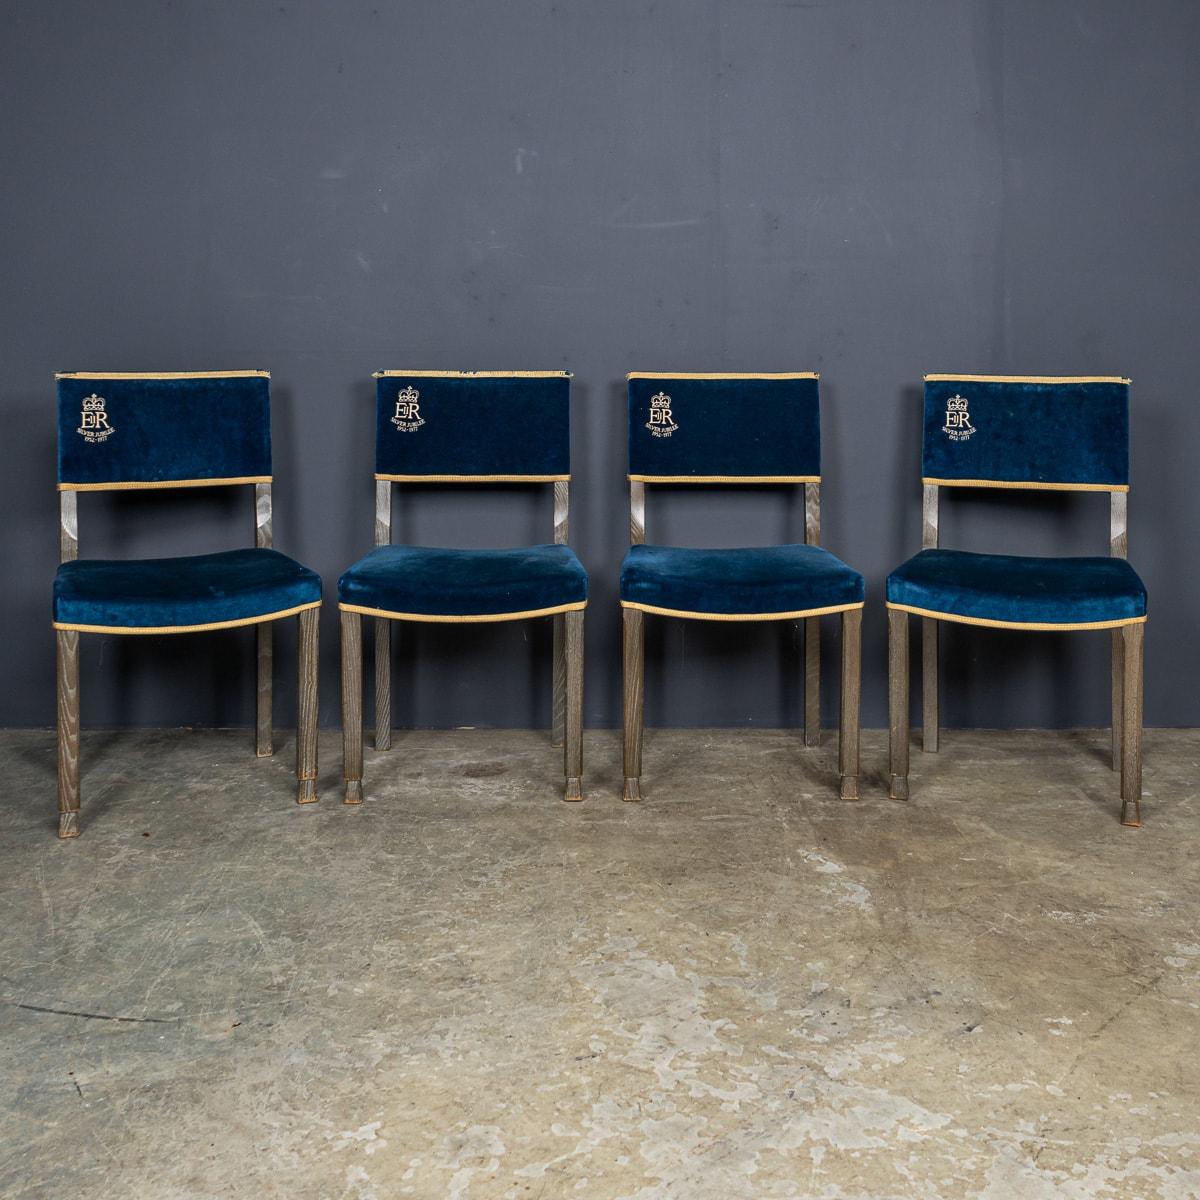 A superb 20th Century set of four vintage blue velvet chairs modelled after the chairs used by peers in Westminster Abbey during Queen Elizabeth's Coronation in 1952. Recreated for her jubilee in 1977, these chairs feature stunning blue velvet